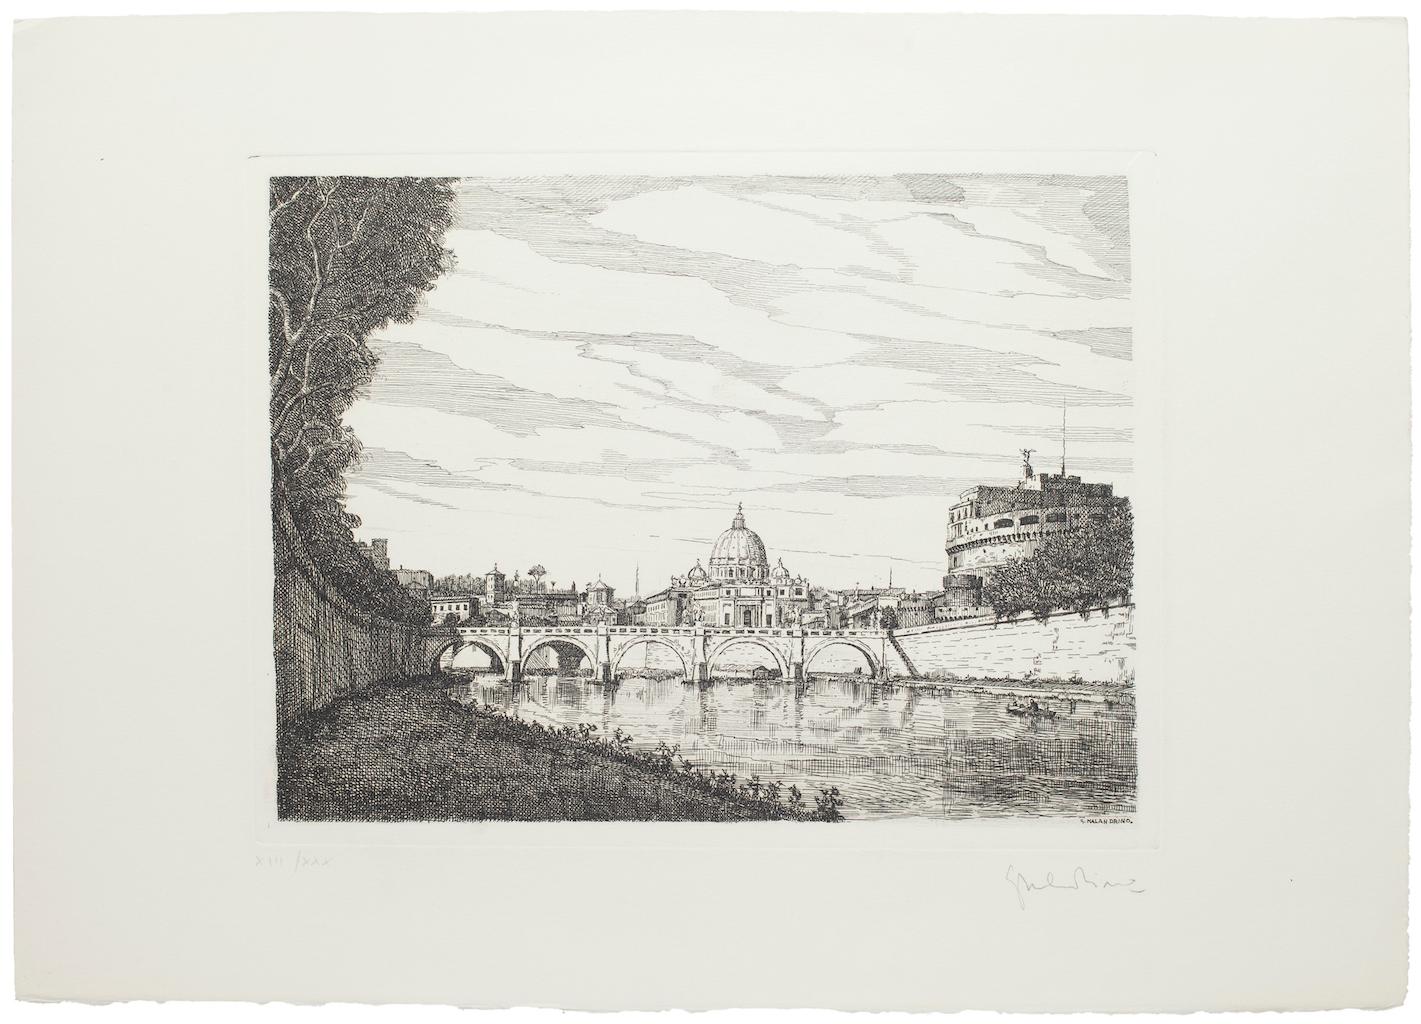 Roman Landscape is an original etching artwork realized by the Italian artist Giuseppe Malandrino.

Hand-signed by the artist on the lower right in pencil.

Numbered in Roman numerals, edition o XIII/XXX prints.

Perfect conditions. 

The artwork